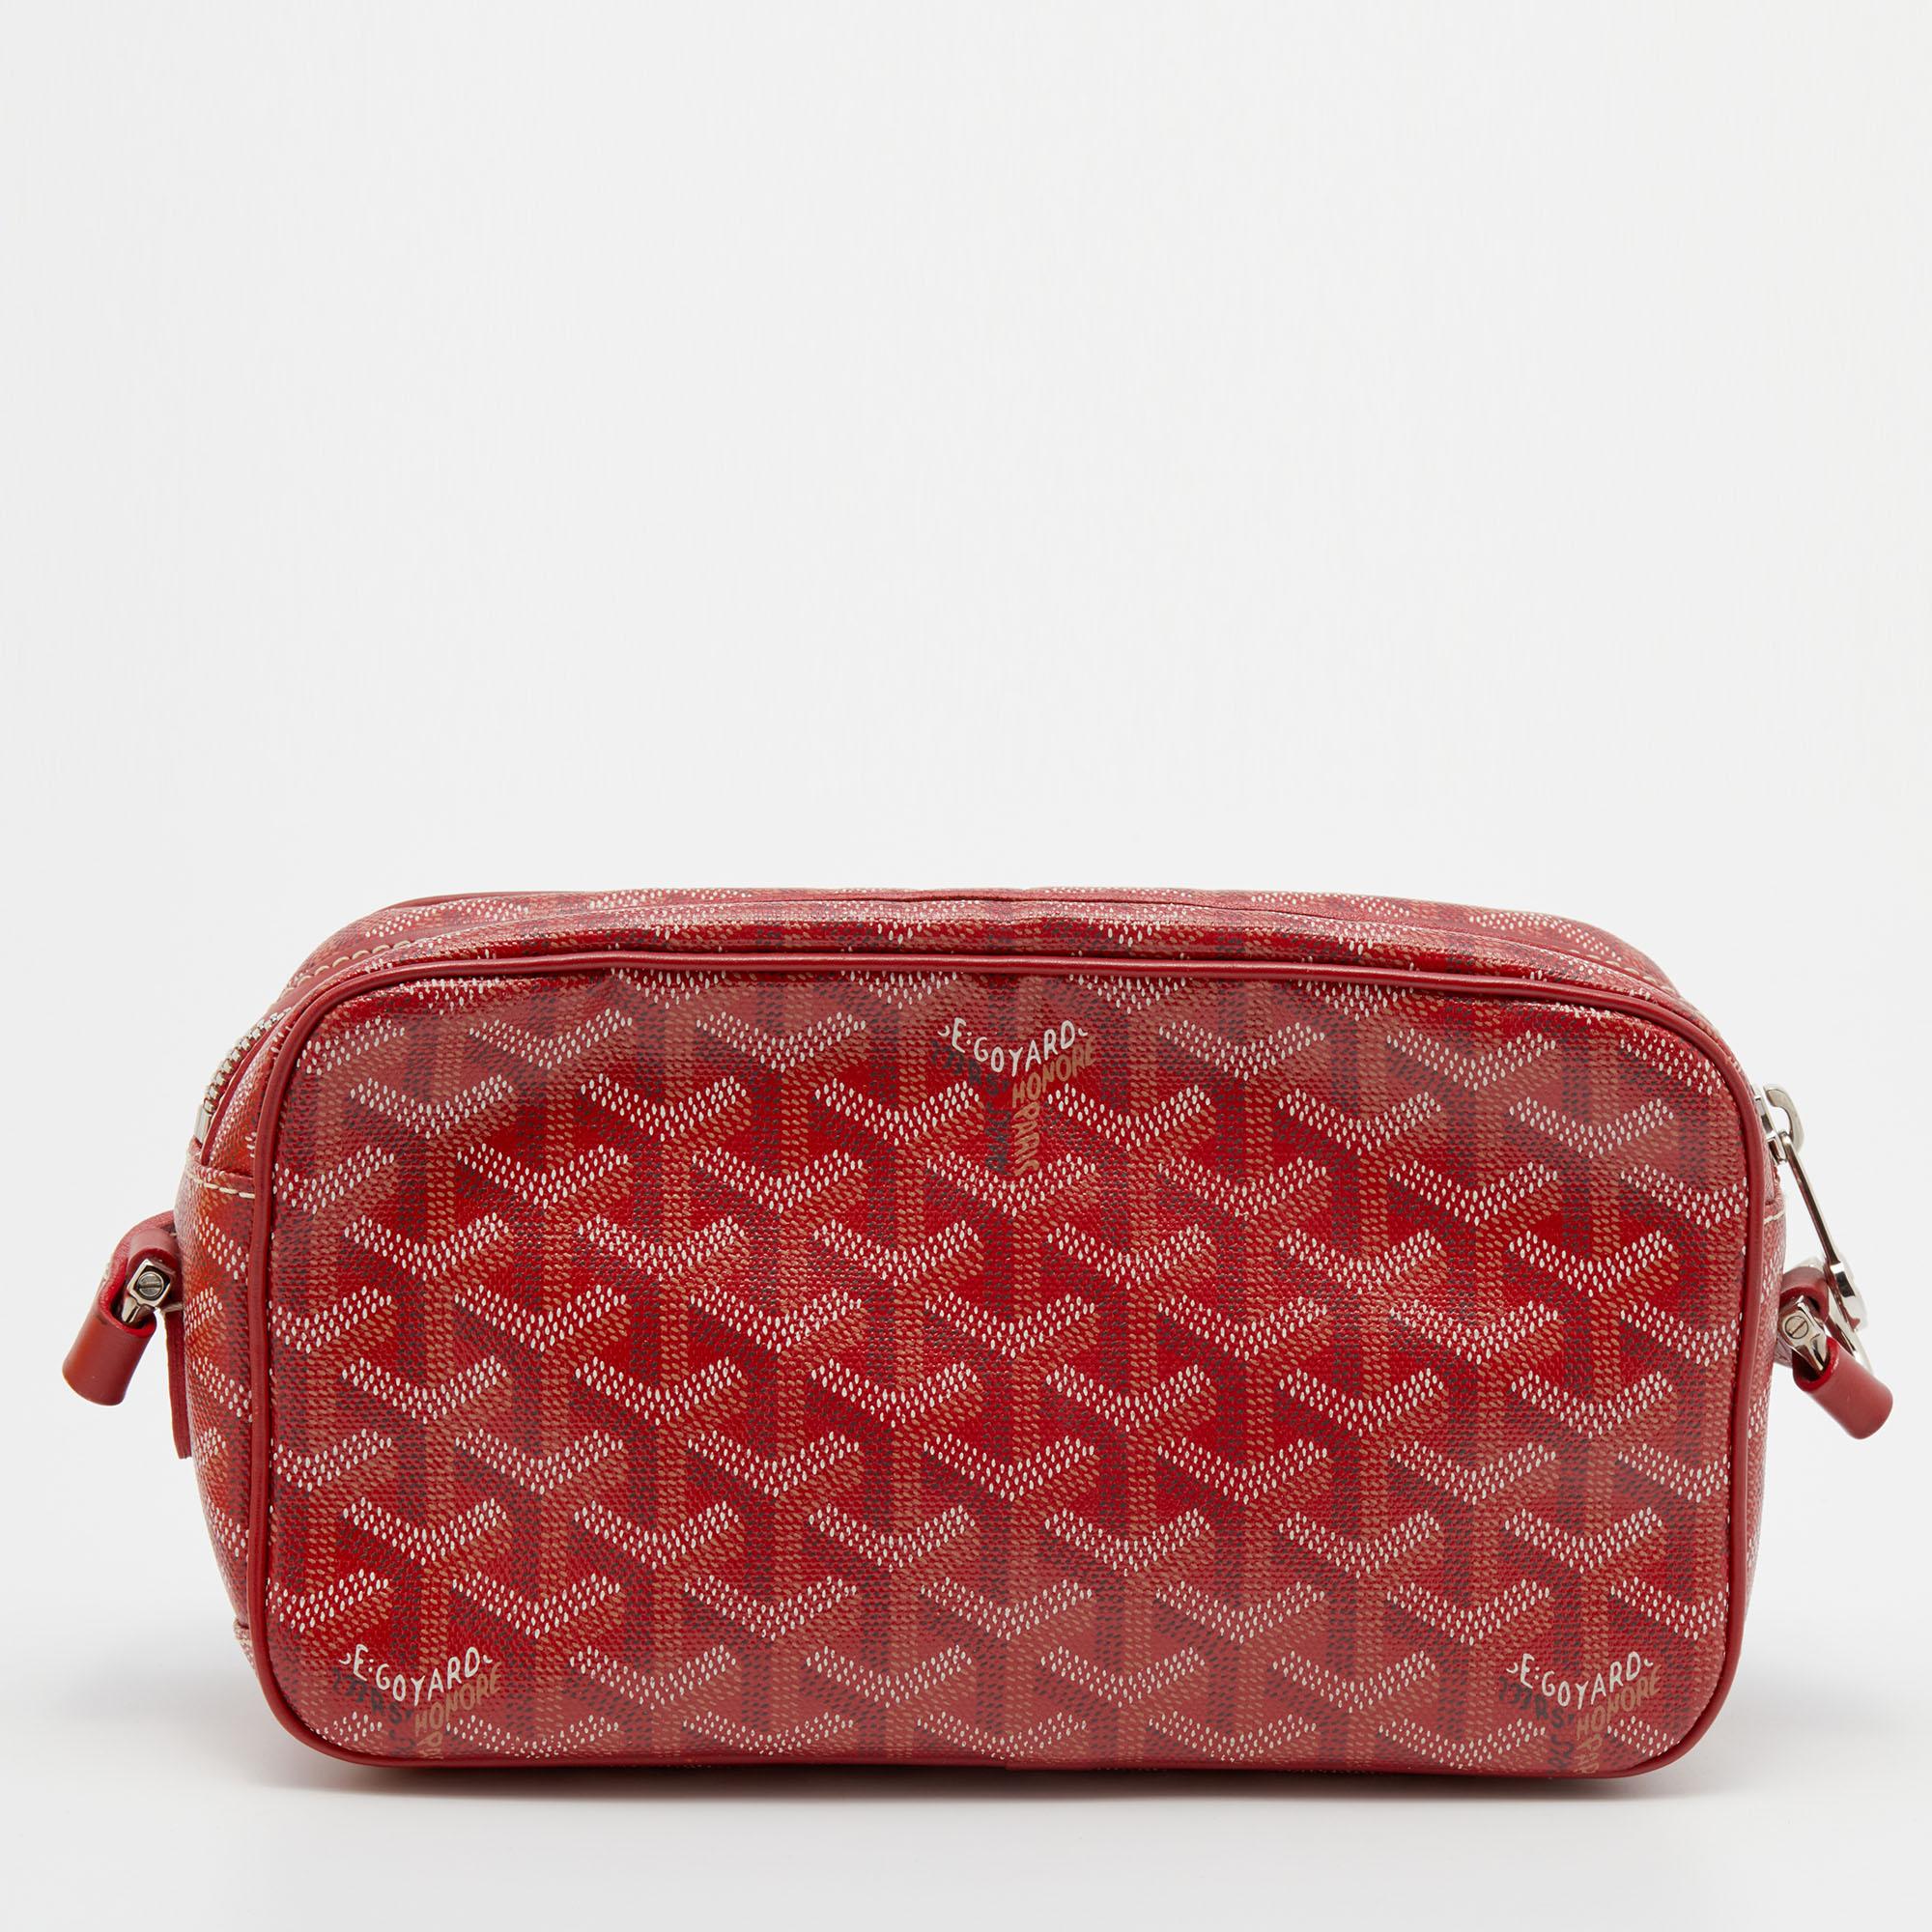 This crossbody bag from Goyard brings along a touch of luxury and immense style. It is crafted from the brand's signature Goyardine canvas and leather in red and is designed with a zip closure that leads to an interior equipped with ample space for